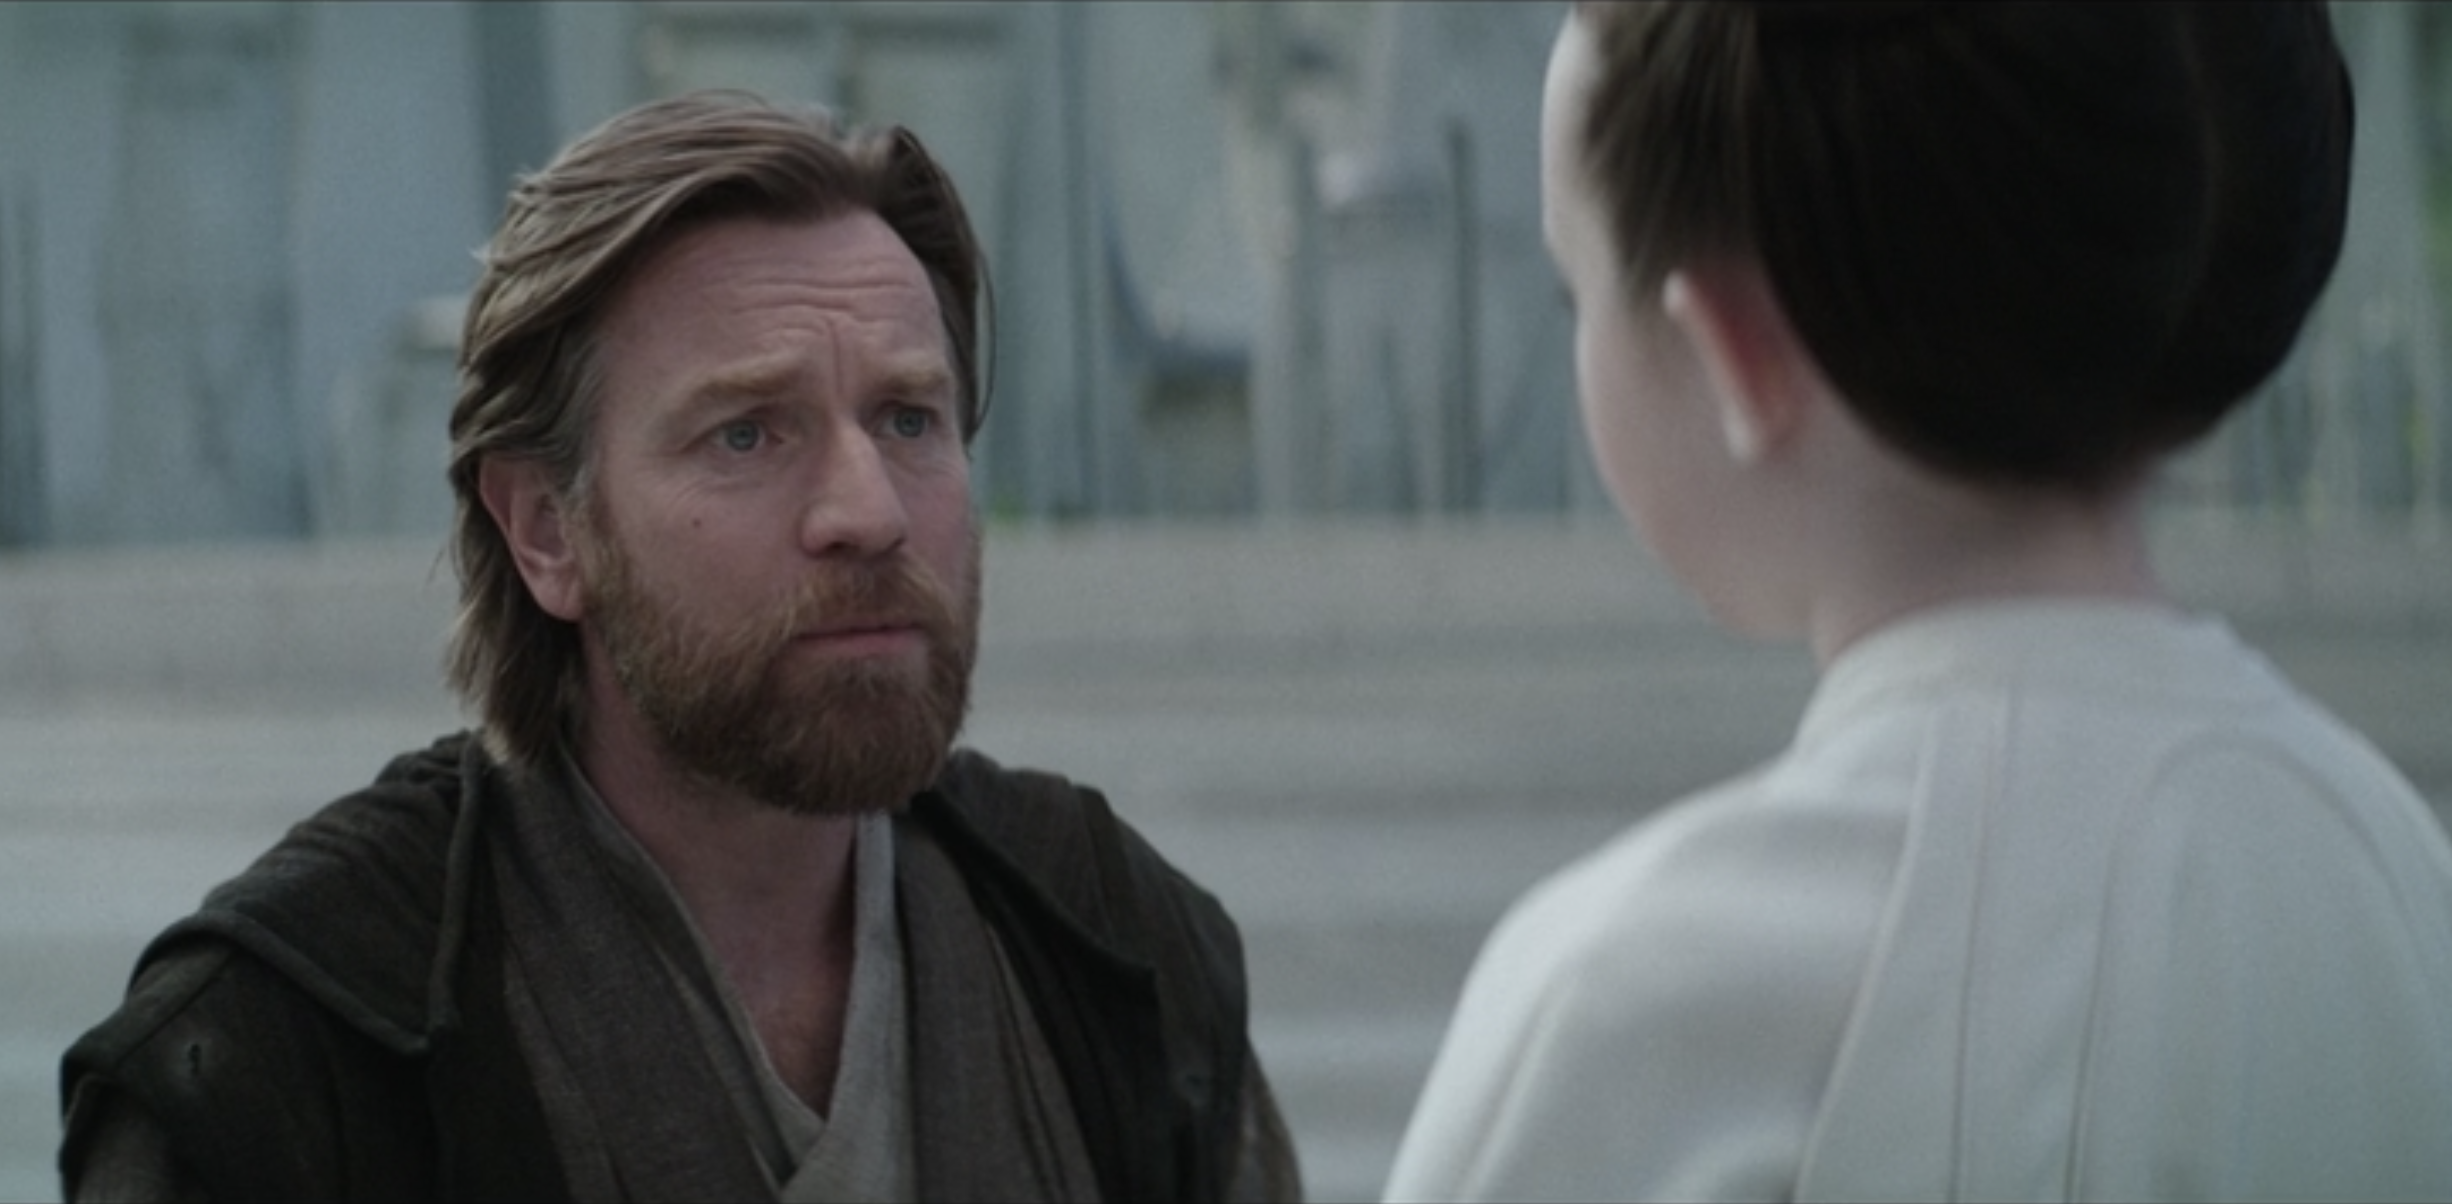 Obi-Wan talking to Leia about her parents